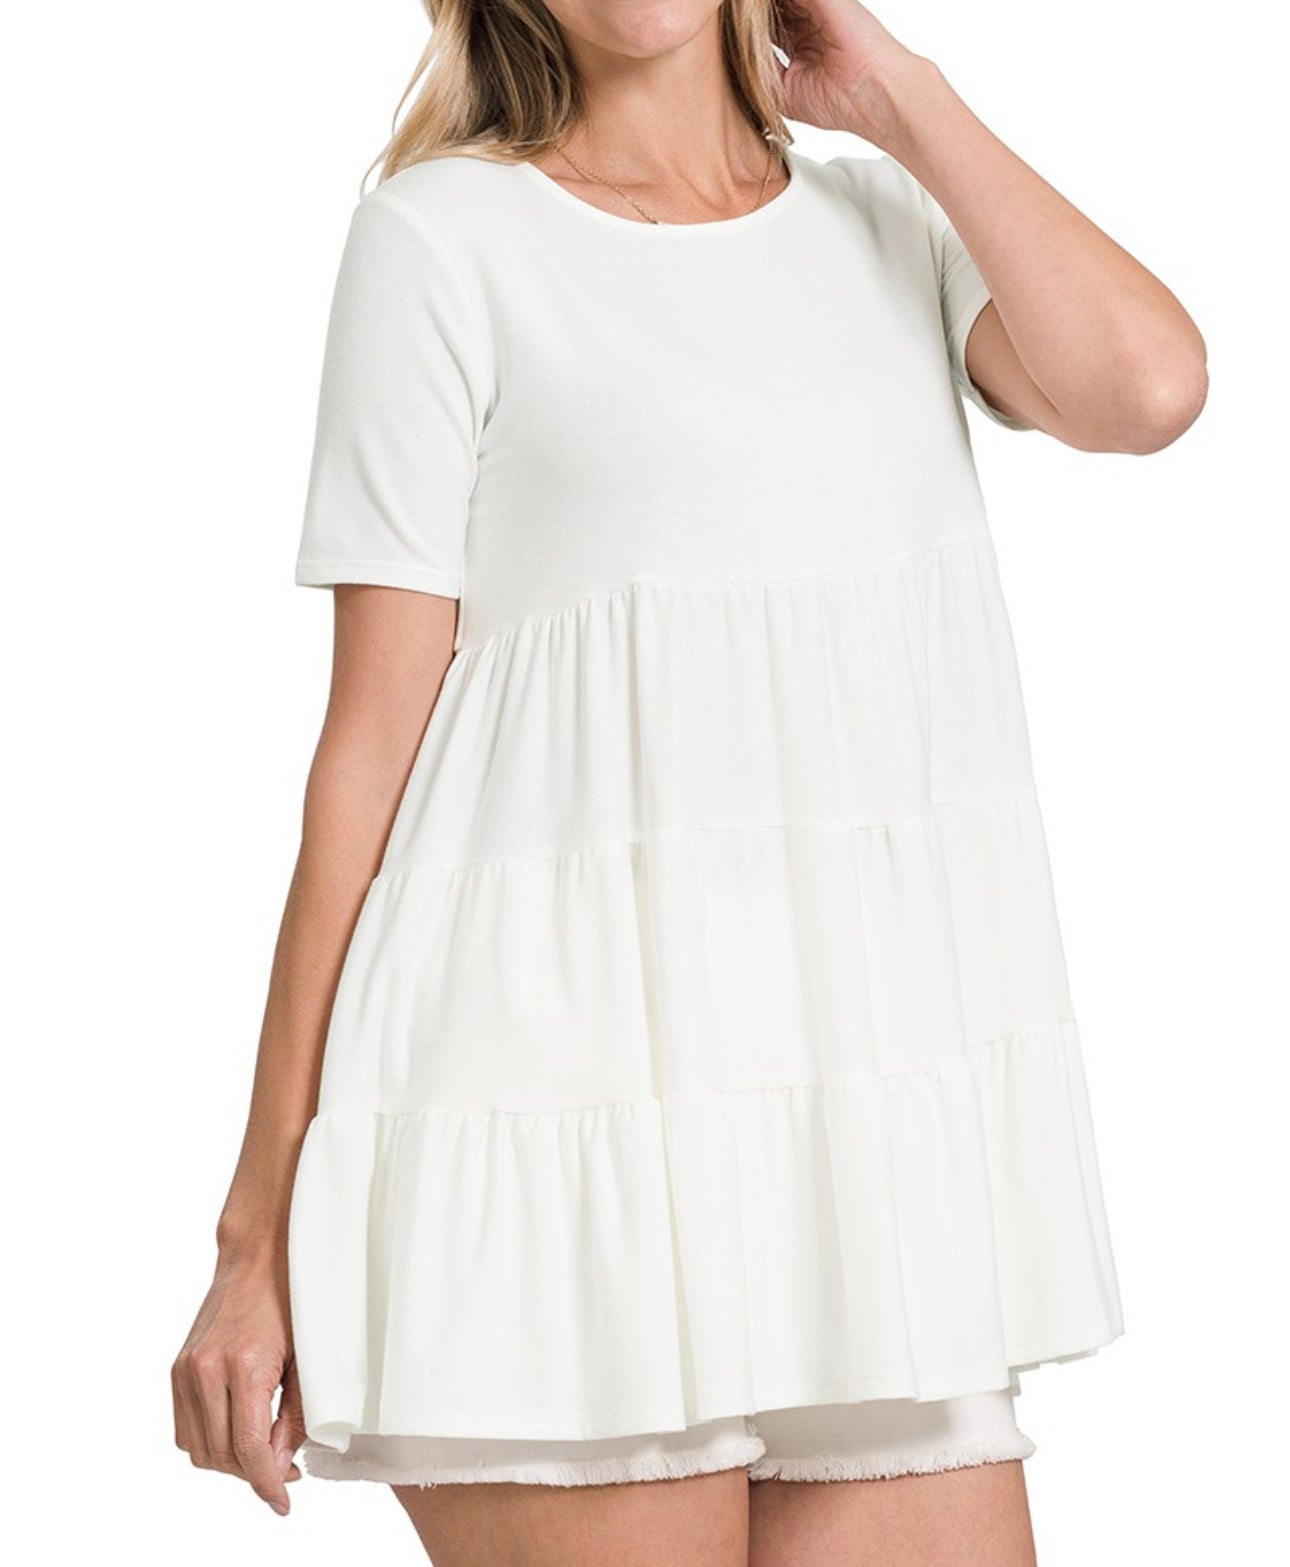 The Basics Ivory Tiered Ruffle Top